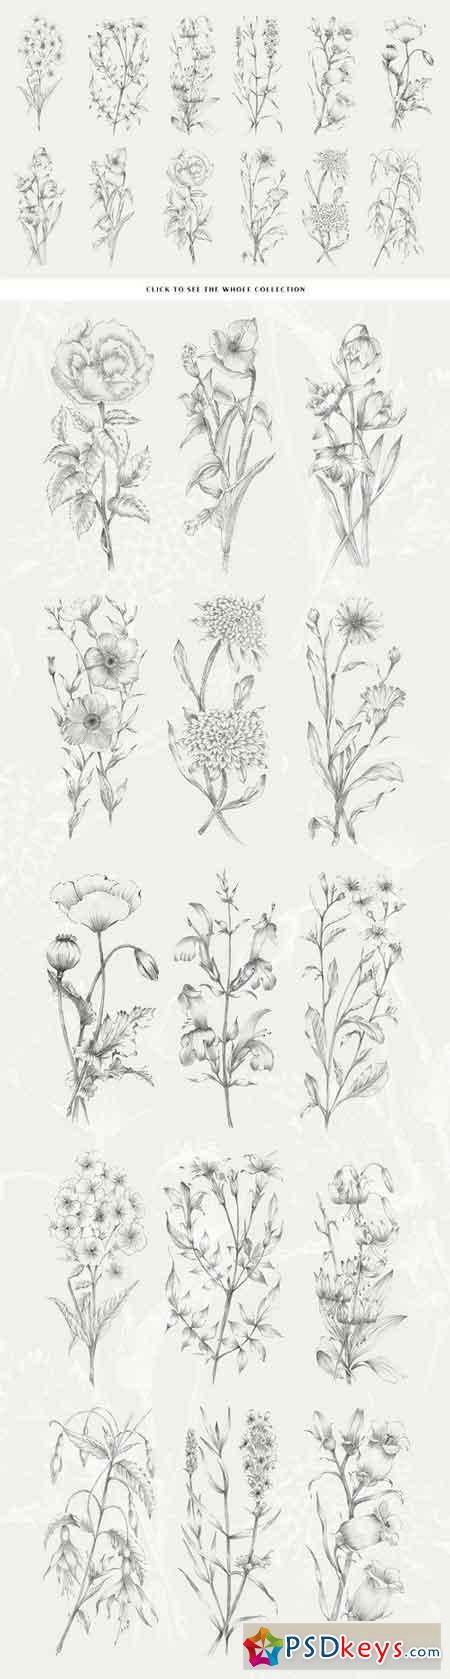 15 Handcrafted Flower Illustrations 1173053